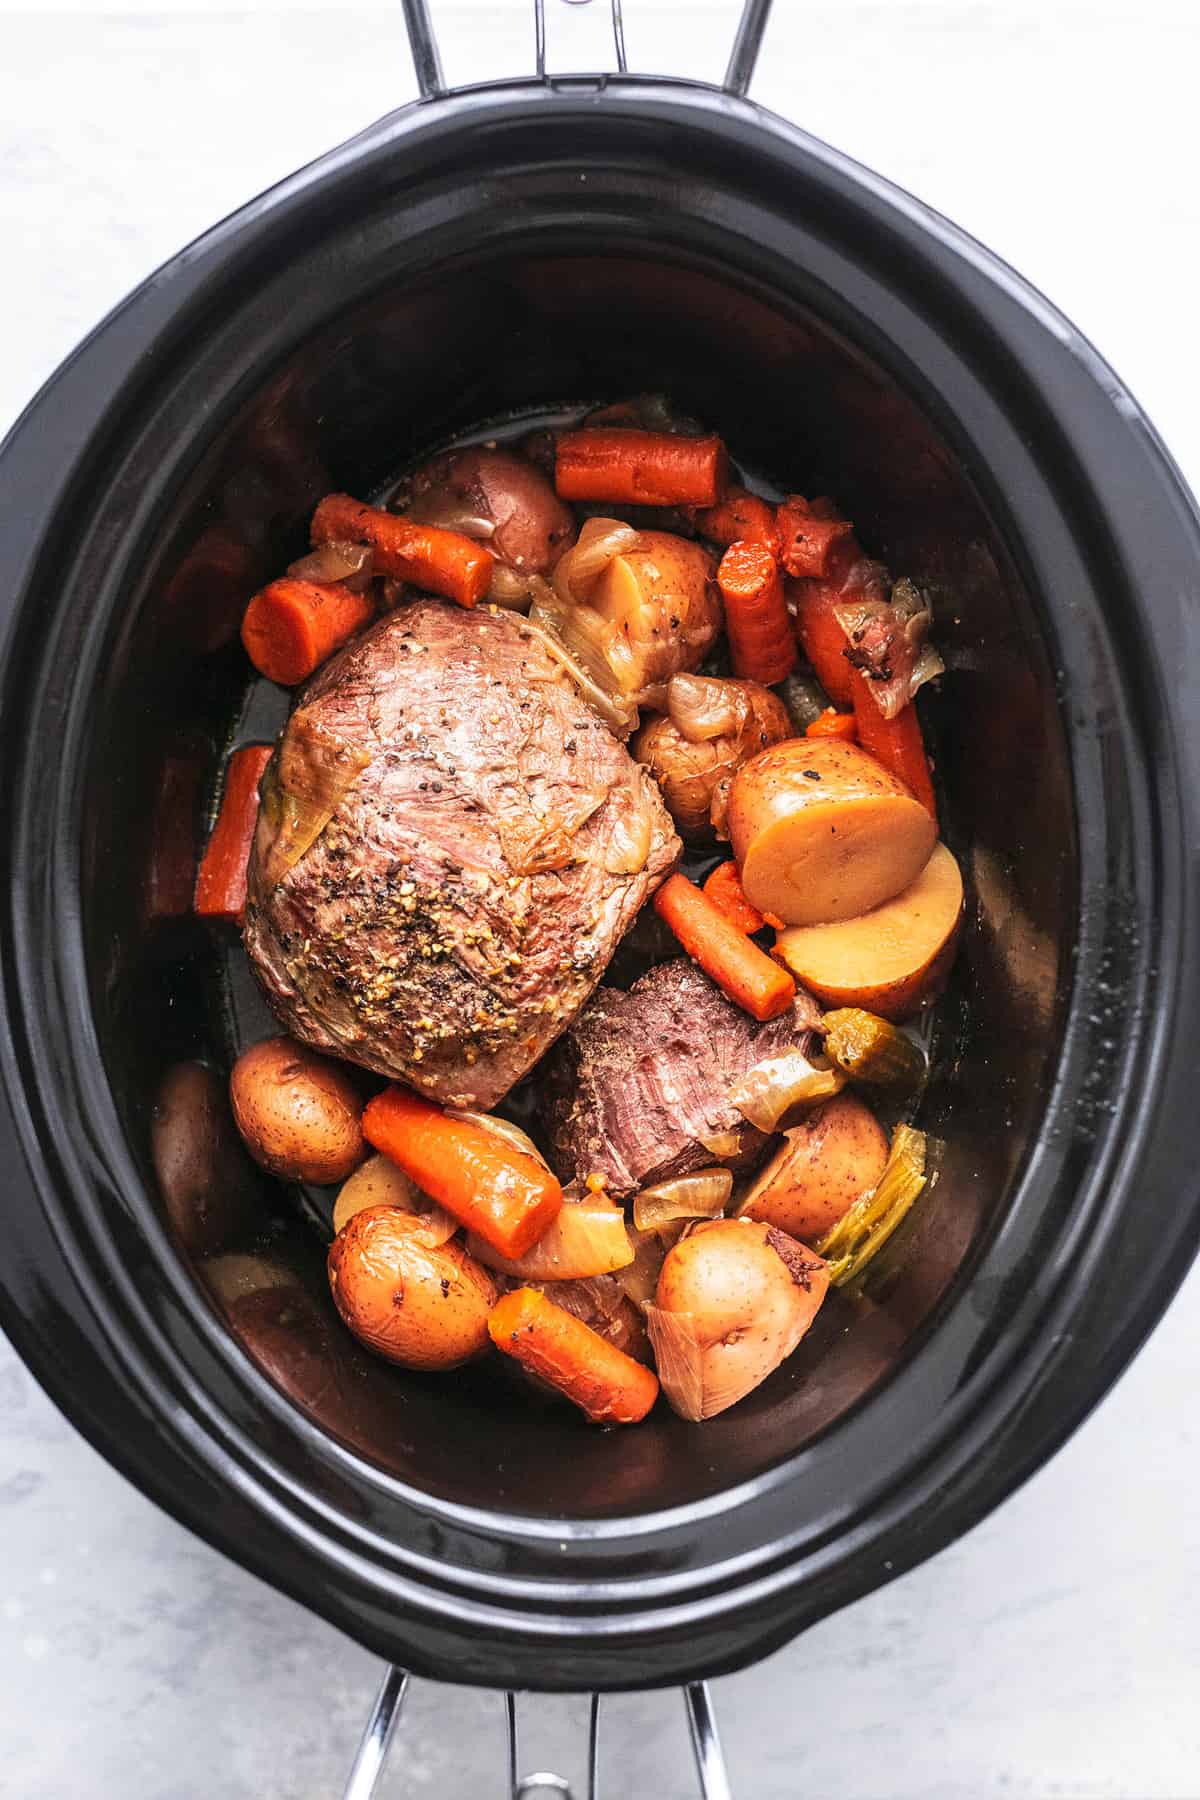 how long to cook slow cooker roast beef